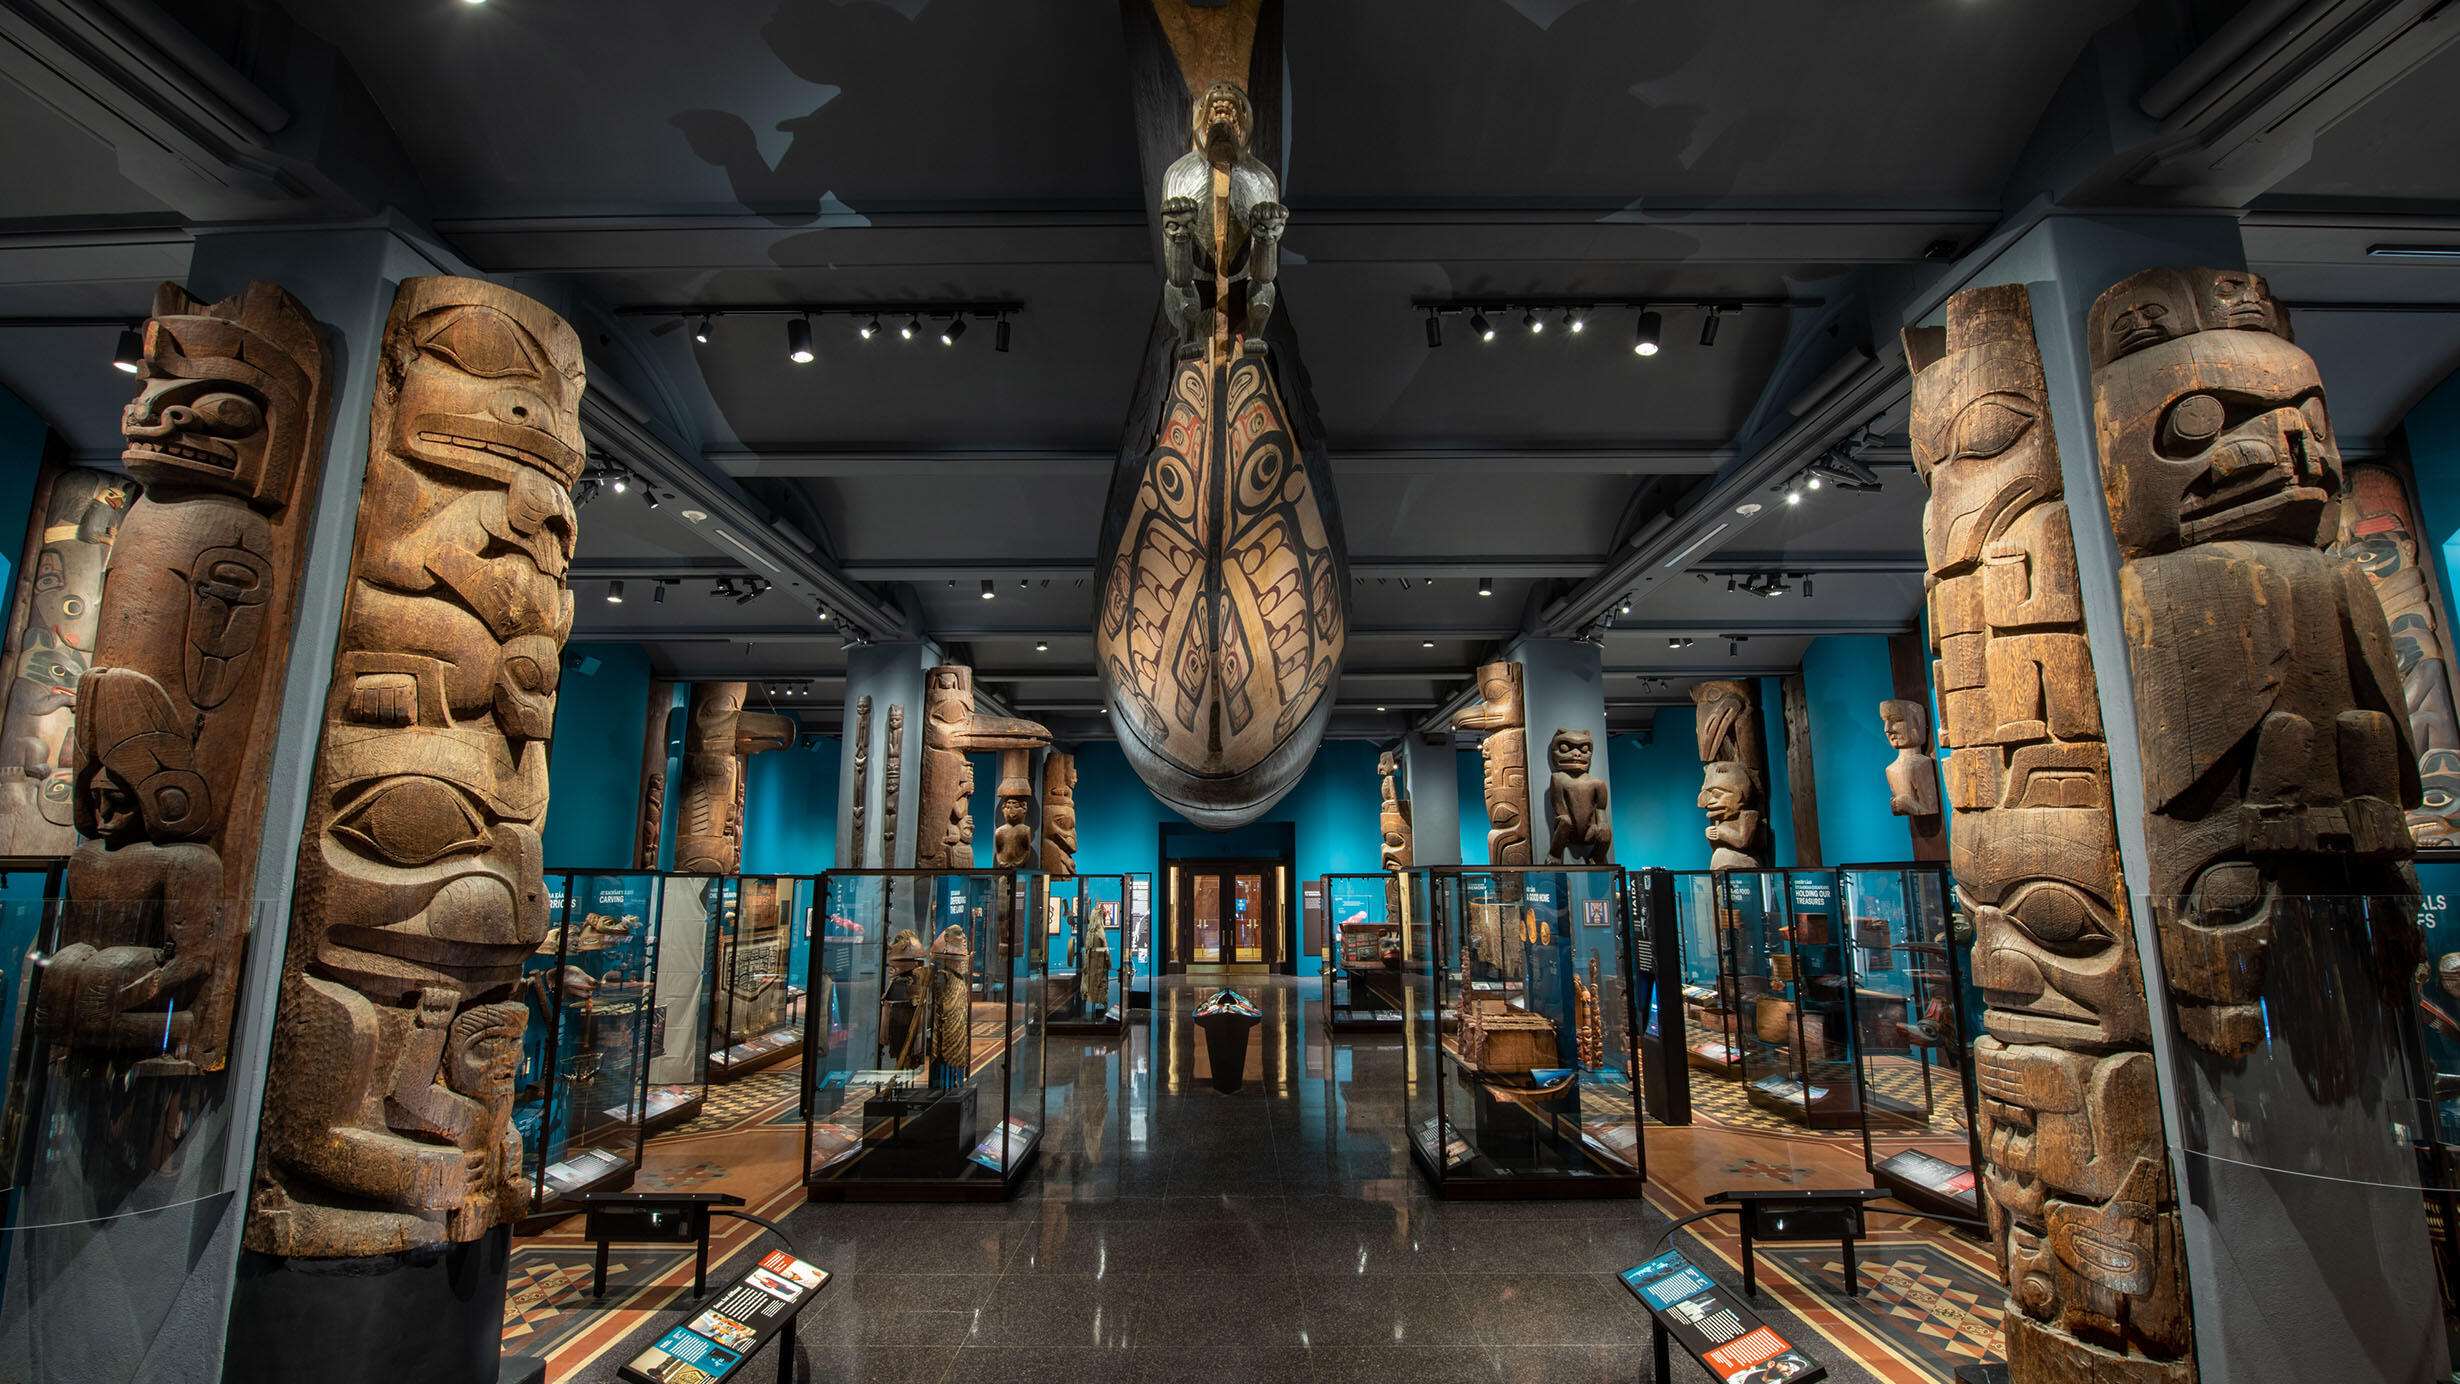 The Great Canoe is suspended from the ceiling, and totem poles and glass display cases line the newly revitalized Northwest Coast Hall.